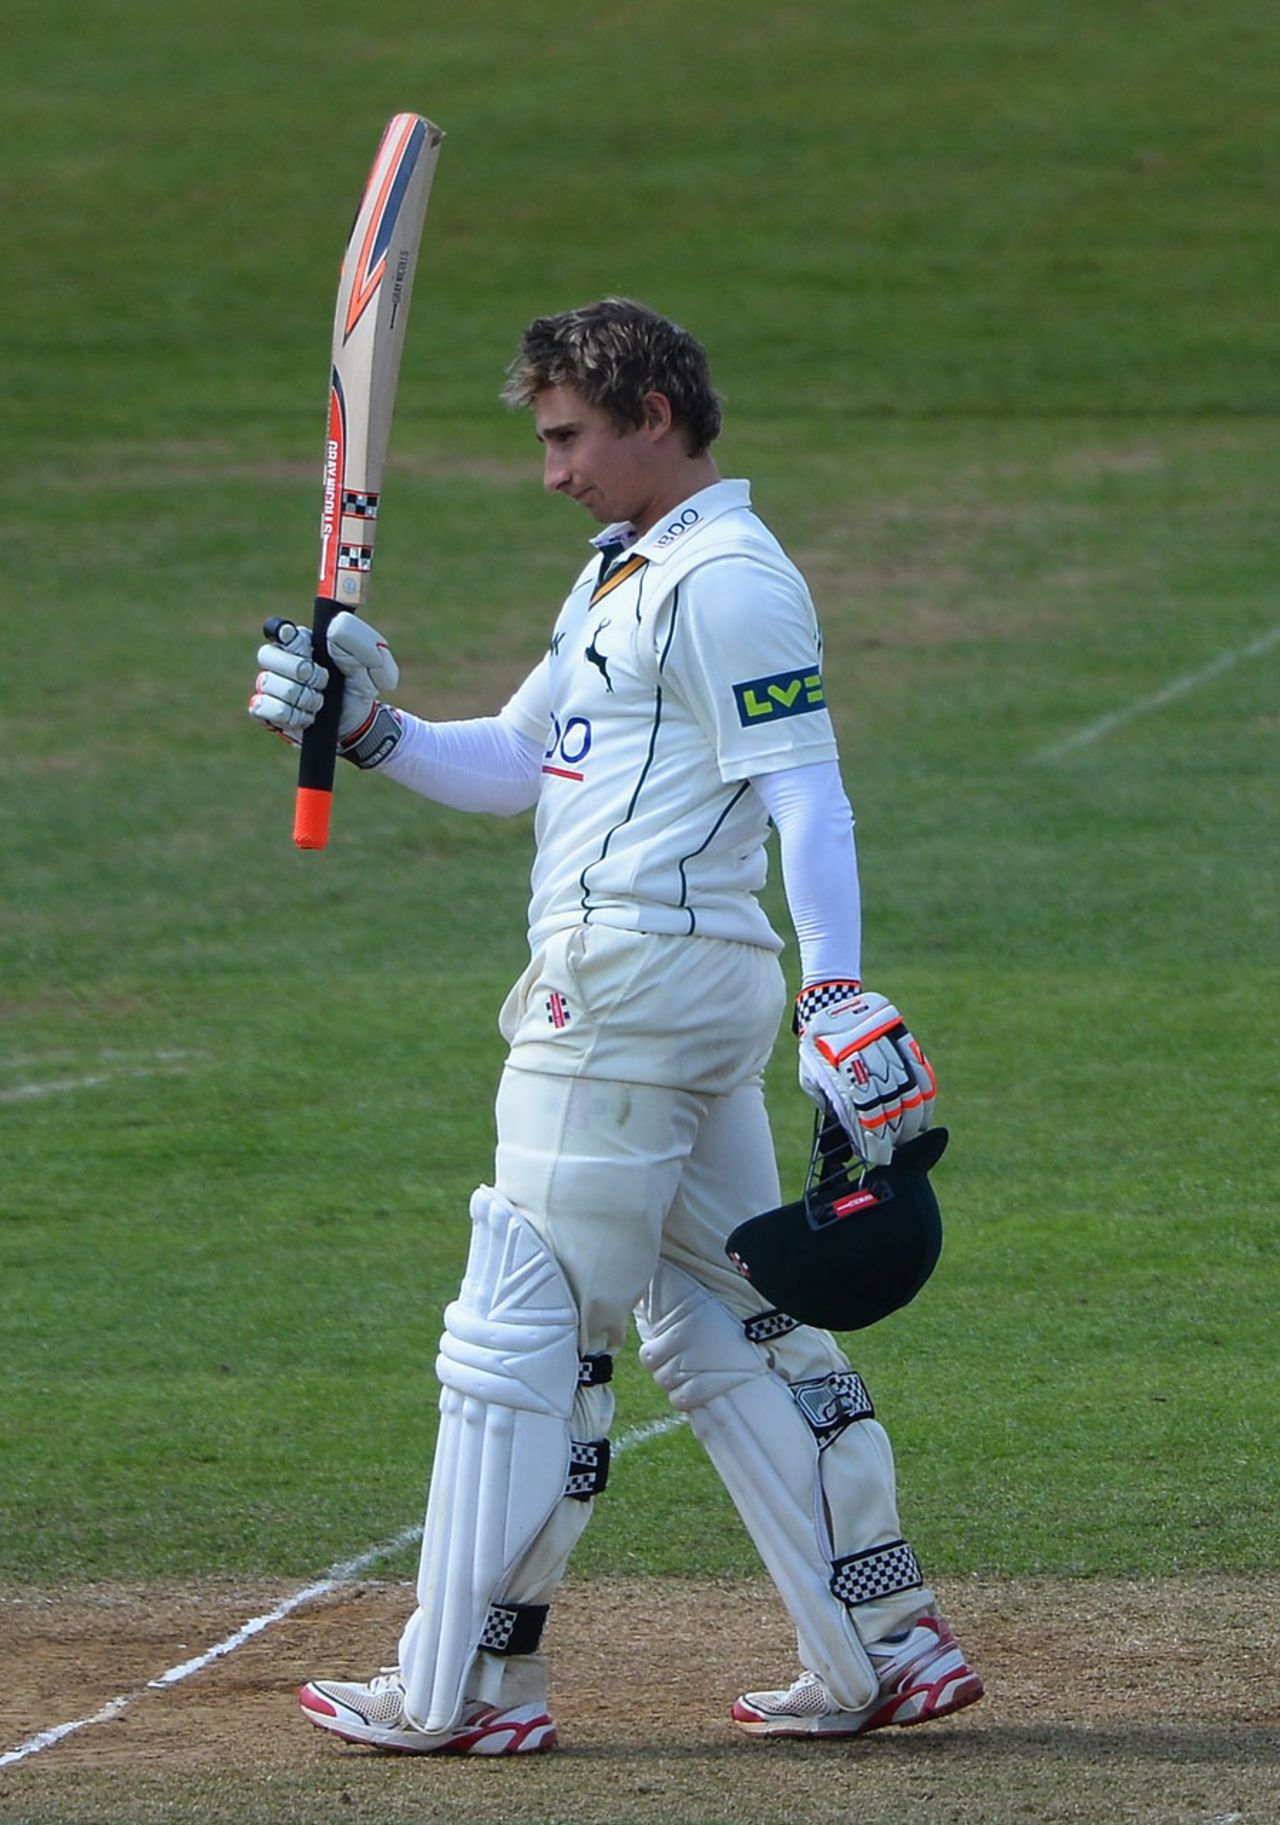 James Taylor reached his century after lunch, Derbyshire v Nottinghamshire, County Championship, Division One, Derby, 3rd day, April 26, 2013